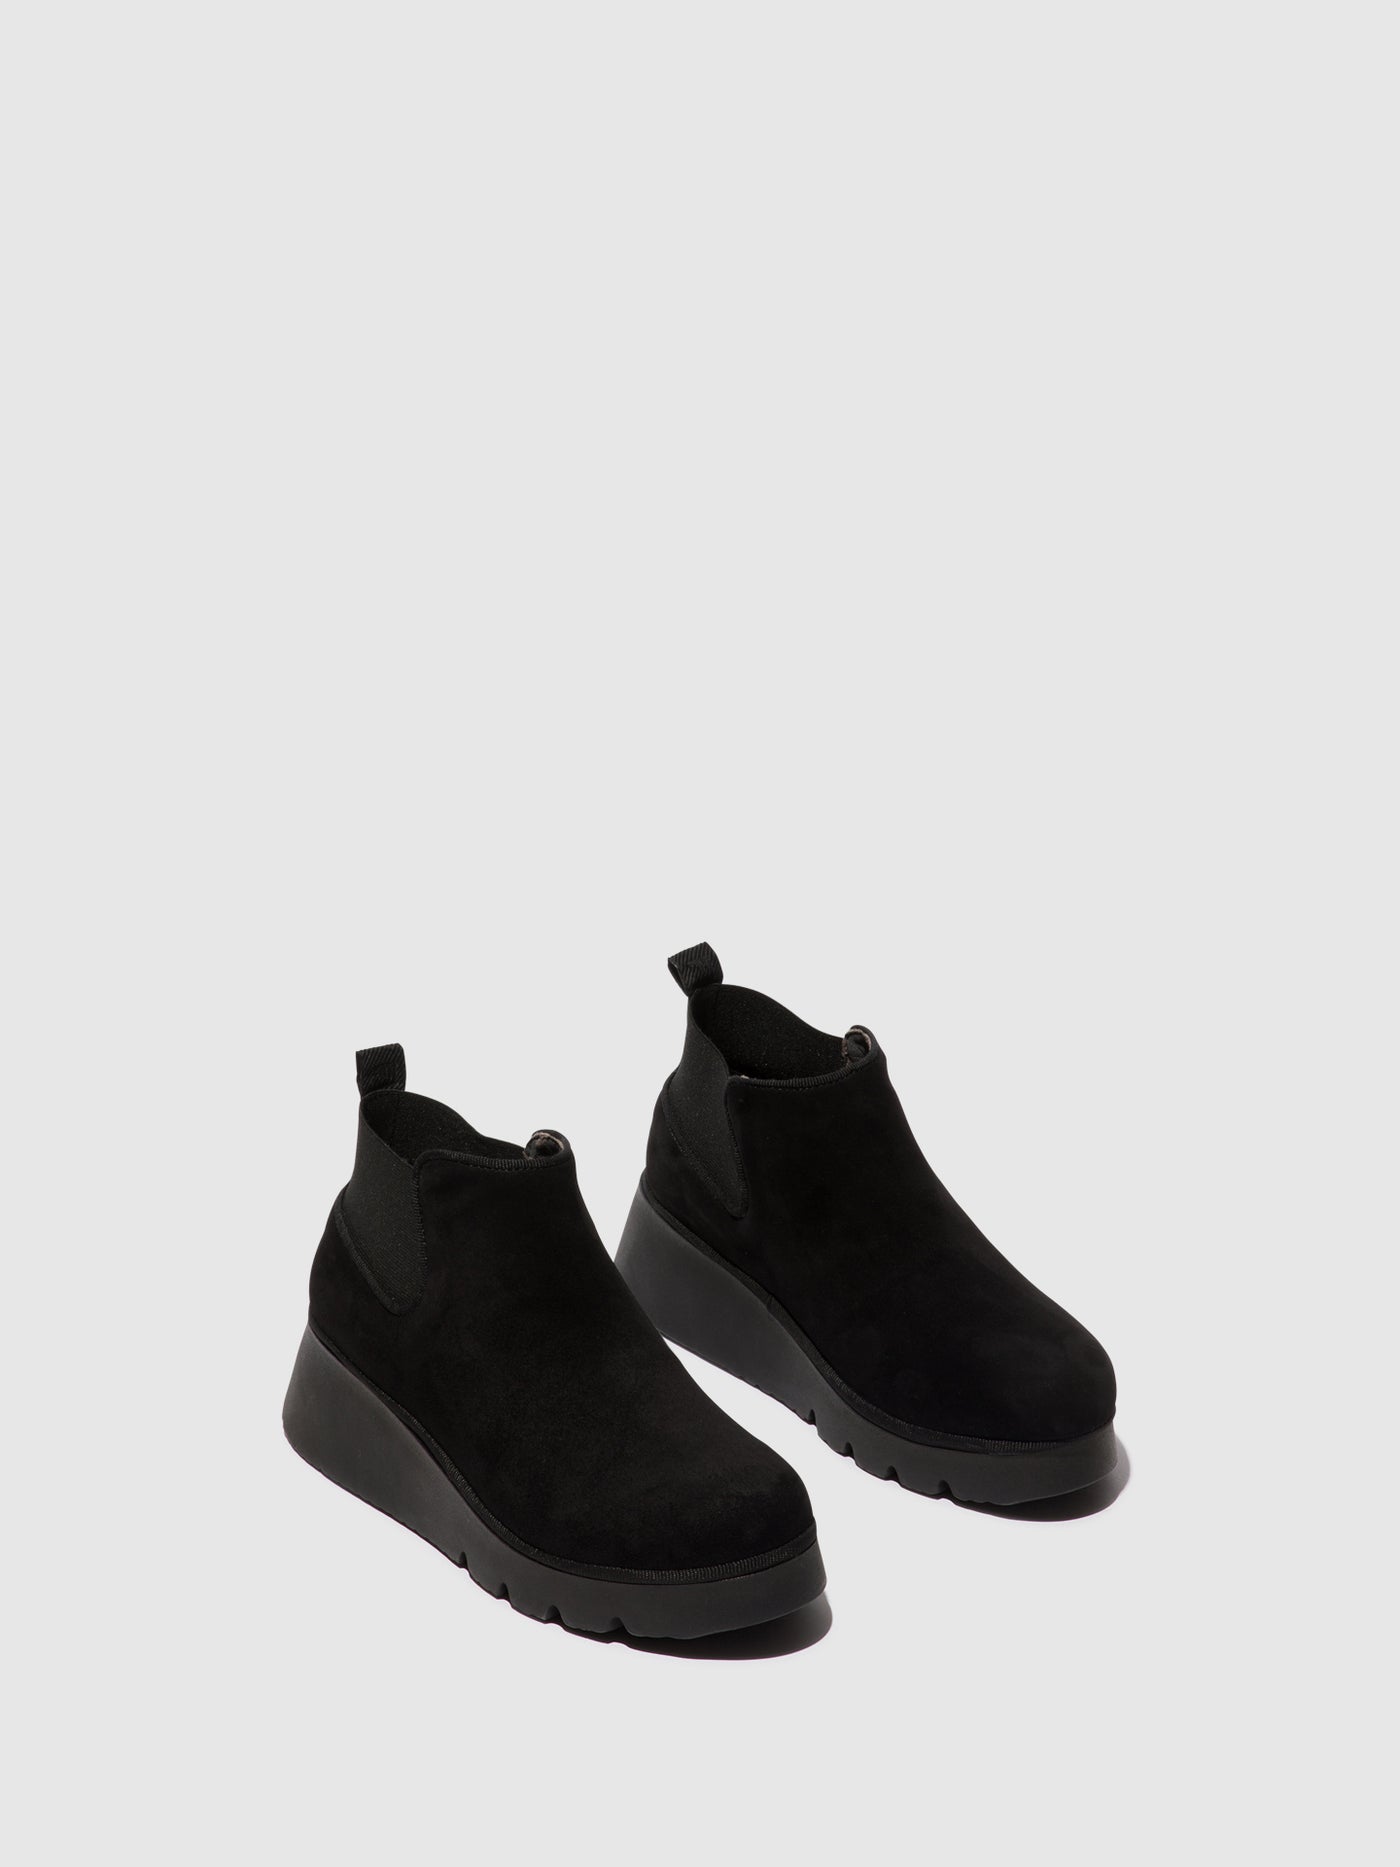 Elasticated Ankle Boots PADA403FLY KID SUEDE BLACK